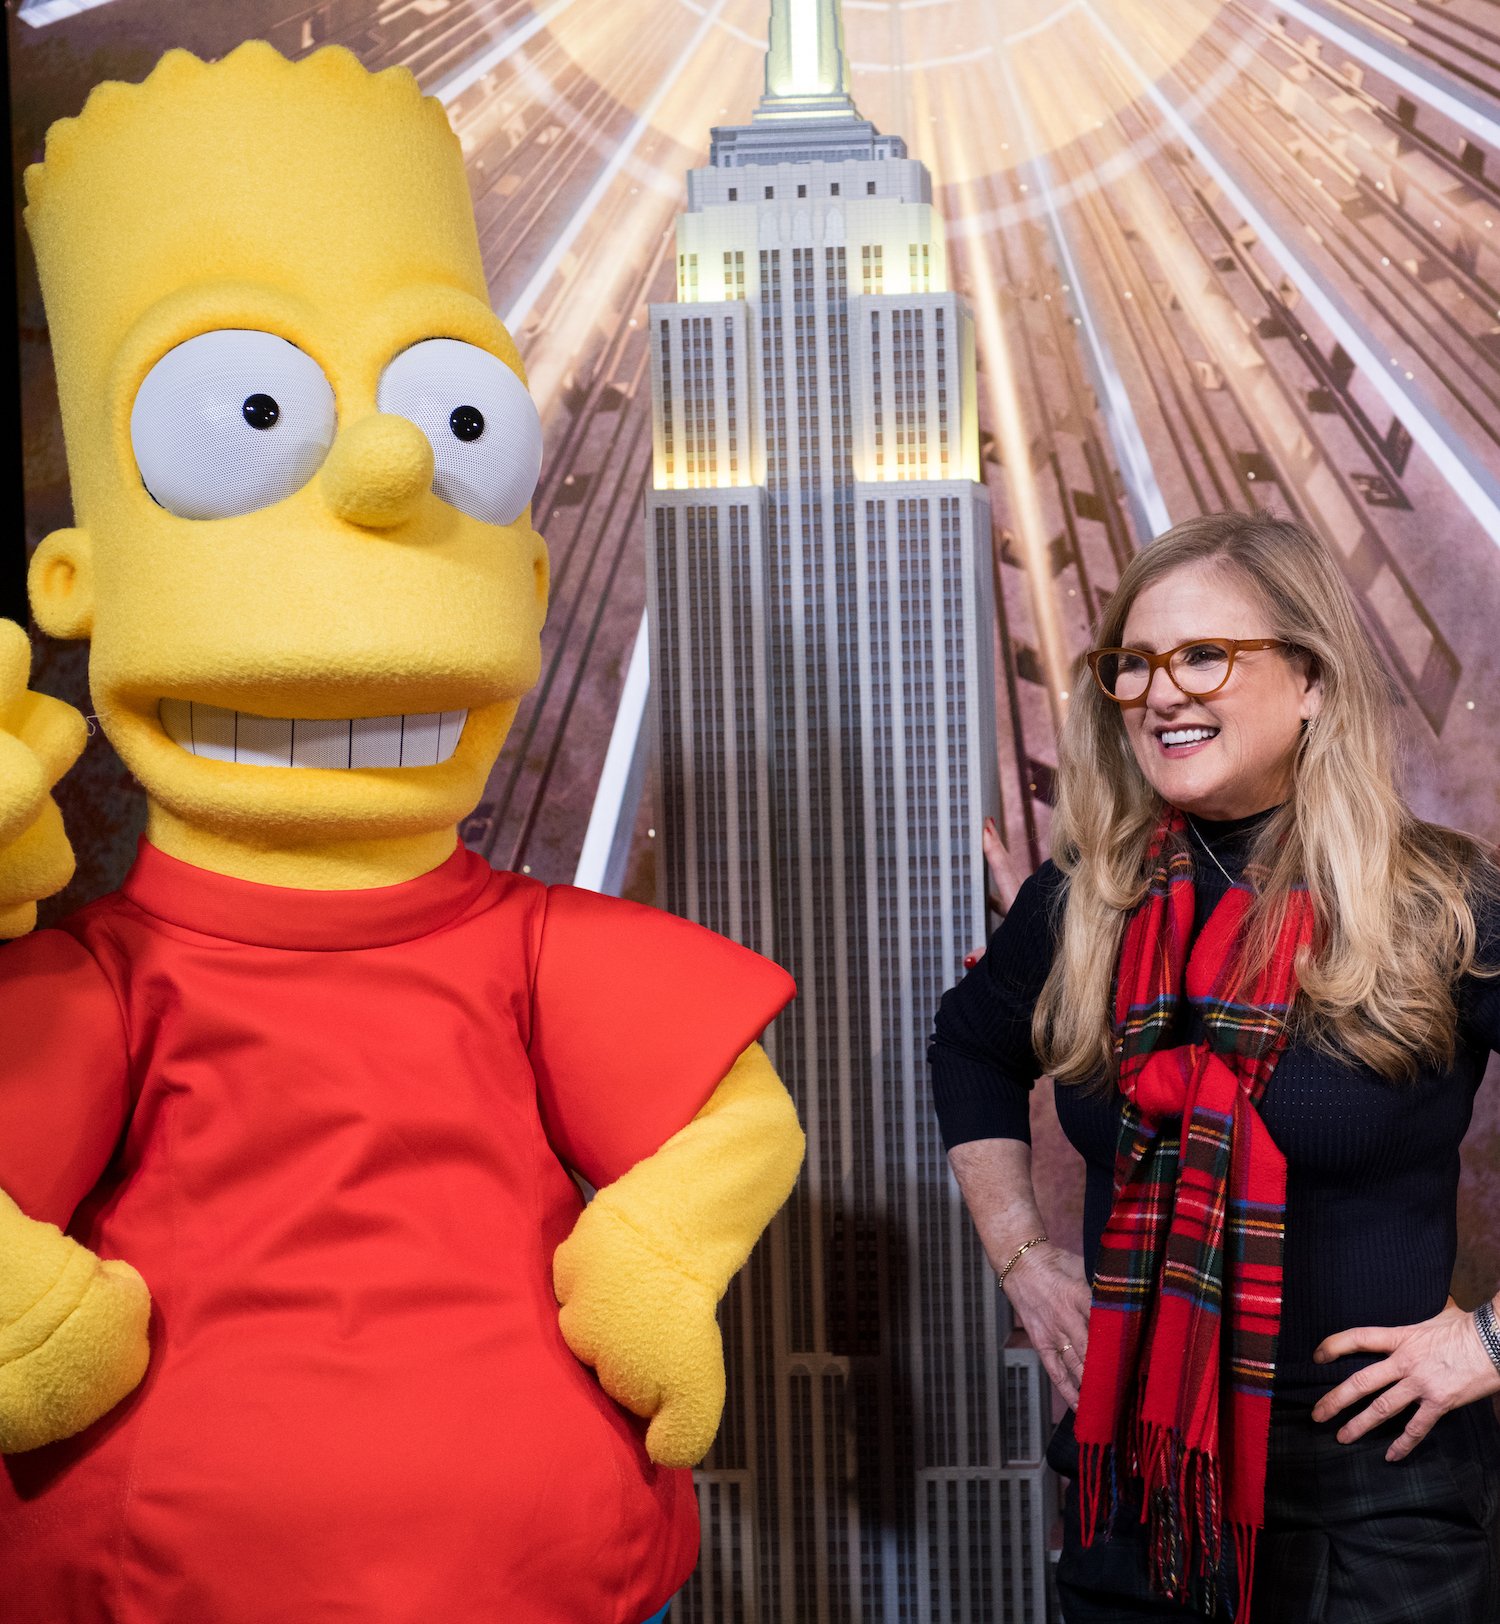 Nancy Cartwright and Bart Simpson celebrate the 30th anniversary of The Simpsons